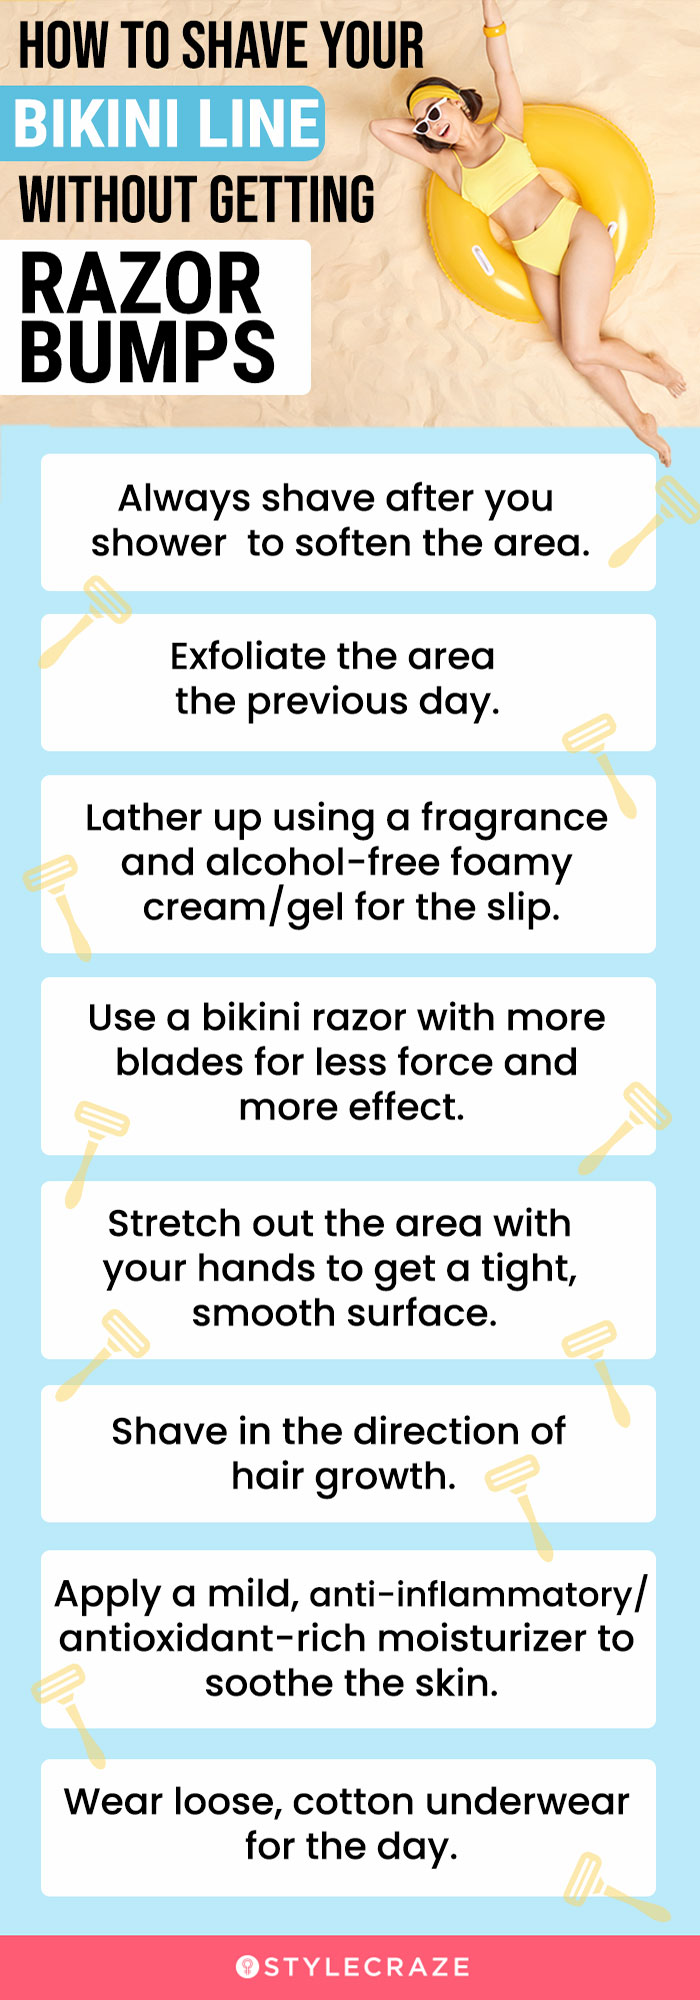 How To Shave Your Bikini Line (infographic)